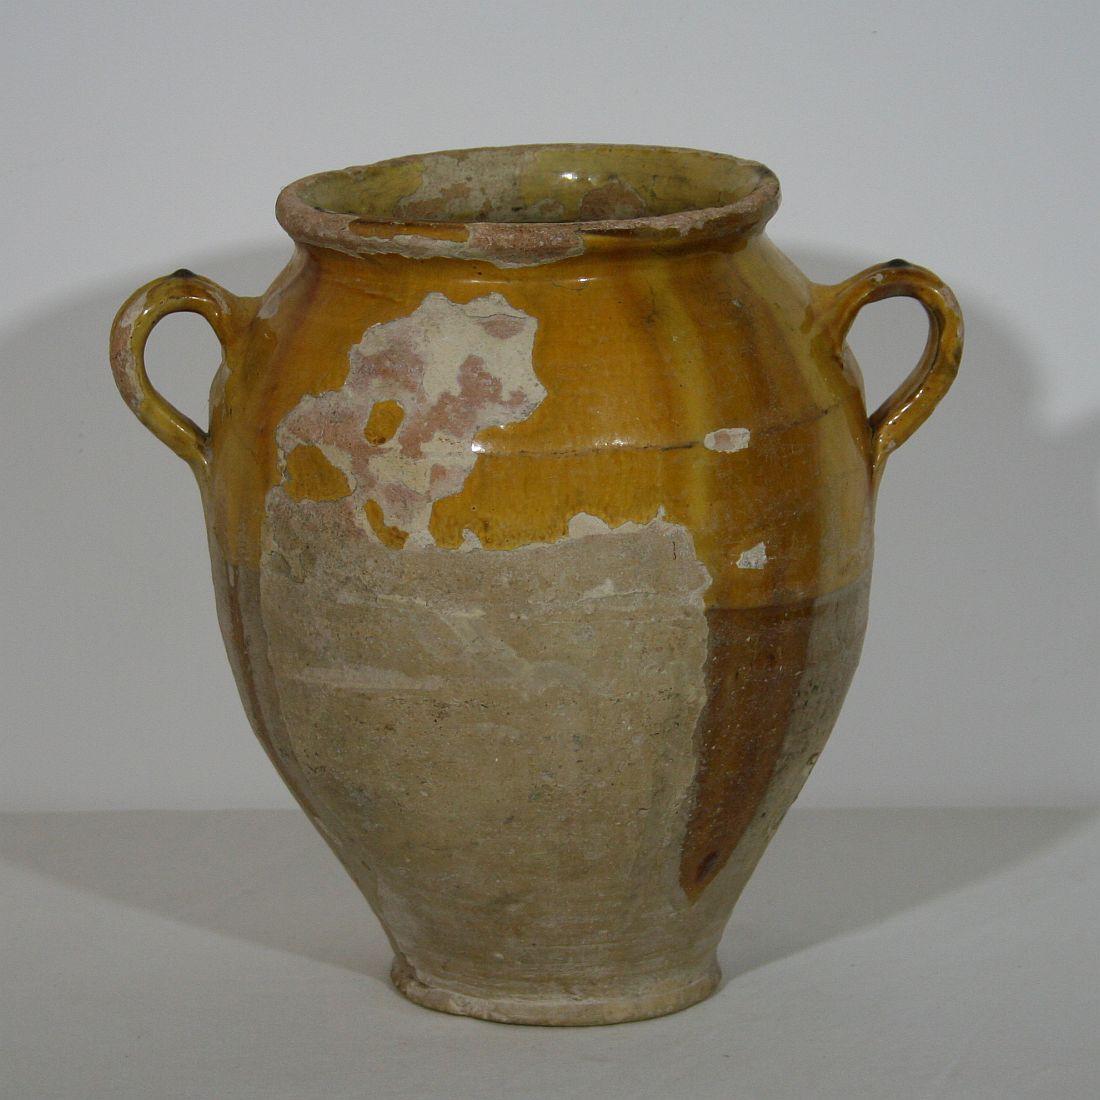 Beautiful weathered confit jar. Confit jars were used primarily in the South of France for the preservation of meats such as duck or goose for dishes such as cassoulet or foie gras.The bottom halves were left unglazed, due to the fact that the pots